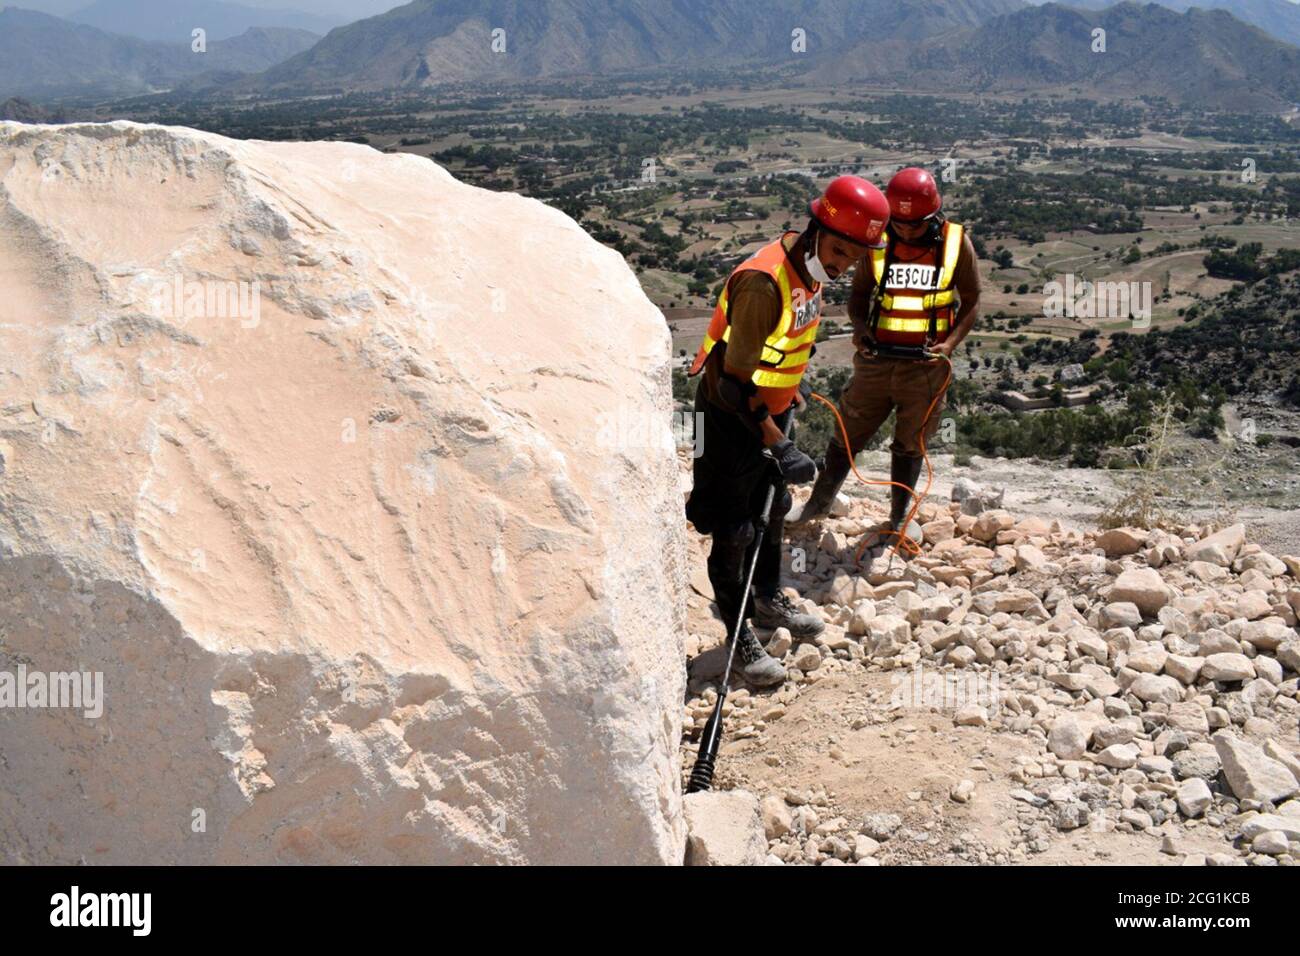 Beijing, China. 8th Sep, 2020. Rescuers search for miners after a rock slide at a marble mine in Pakistan's northwest tribal district of Mohmand, Sept. 8, 2020. The death toll from the rock slide incident at a marble mine, which took place on Monday in Pakistan's northwest tribal district of Mohmand, climbed to 19, police and local media said on Tuesday. Credit: Str/Xinhua/Alamy Live News Stock Photo